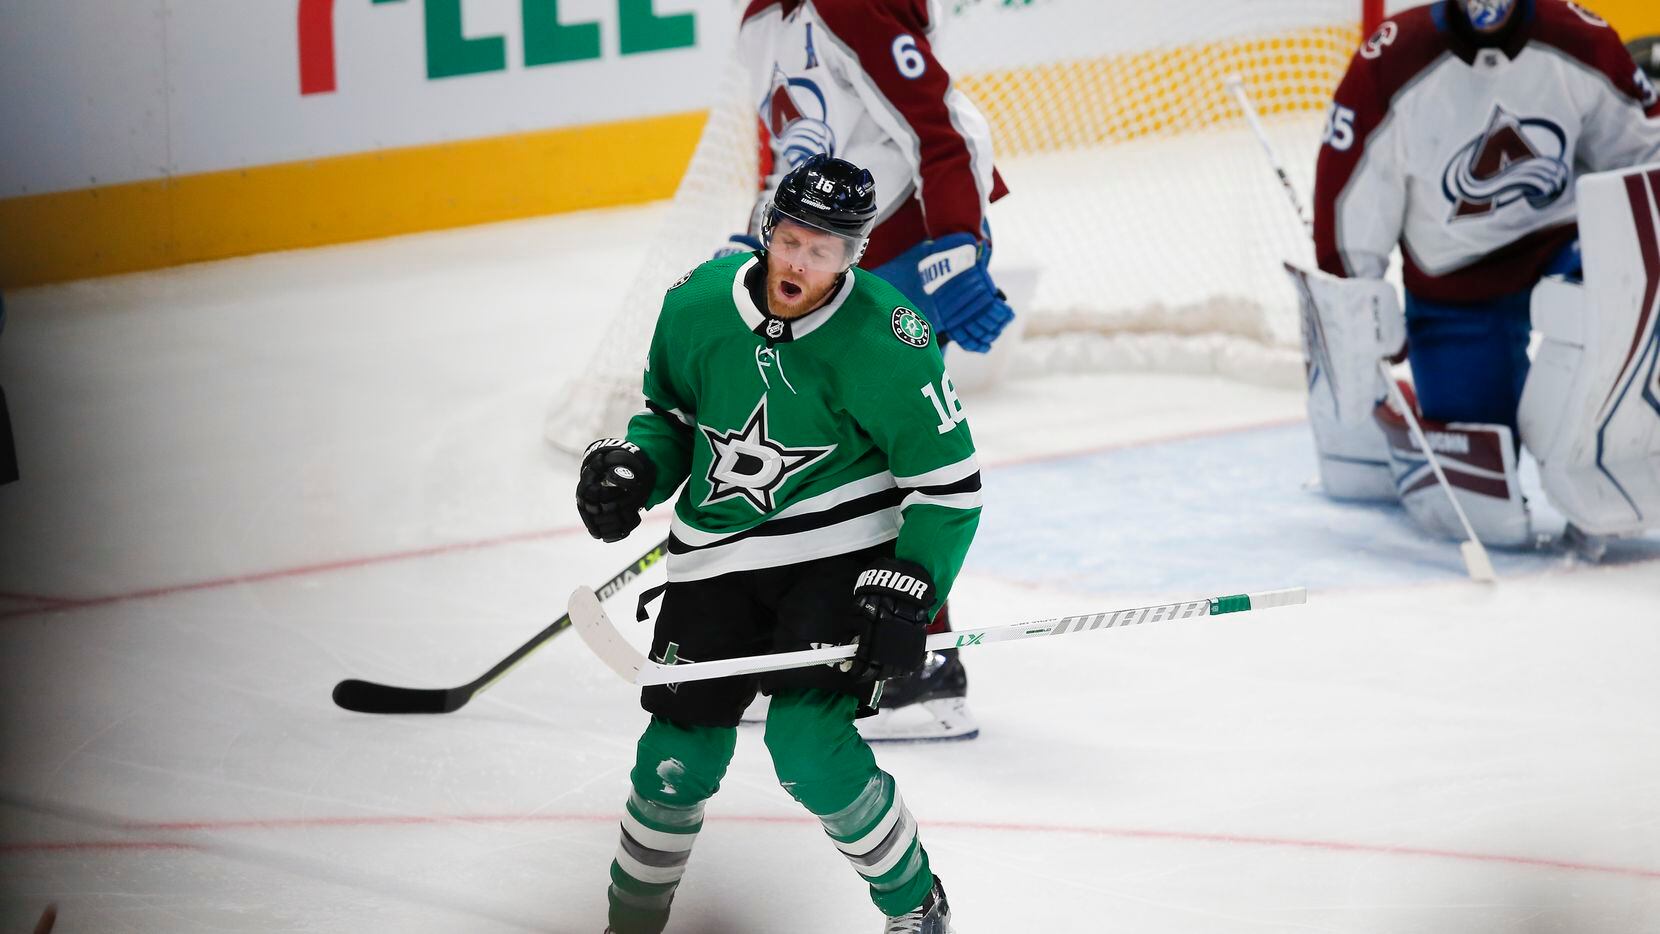 Dallas Stars forward Joe Pavelski (16) celebrates scoring his second goal of the game during the first period of an NHL hockey game against the Colorado Avalanche in Dallas, Friday, November 26, 2021. (Brandon Wade/Special Contributor)